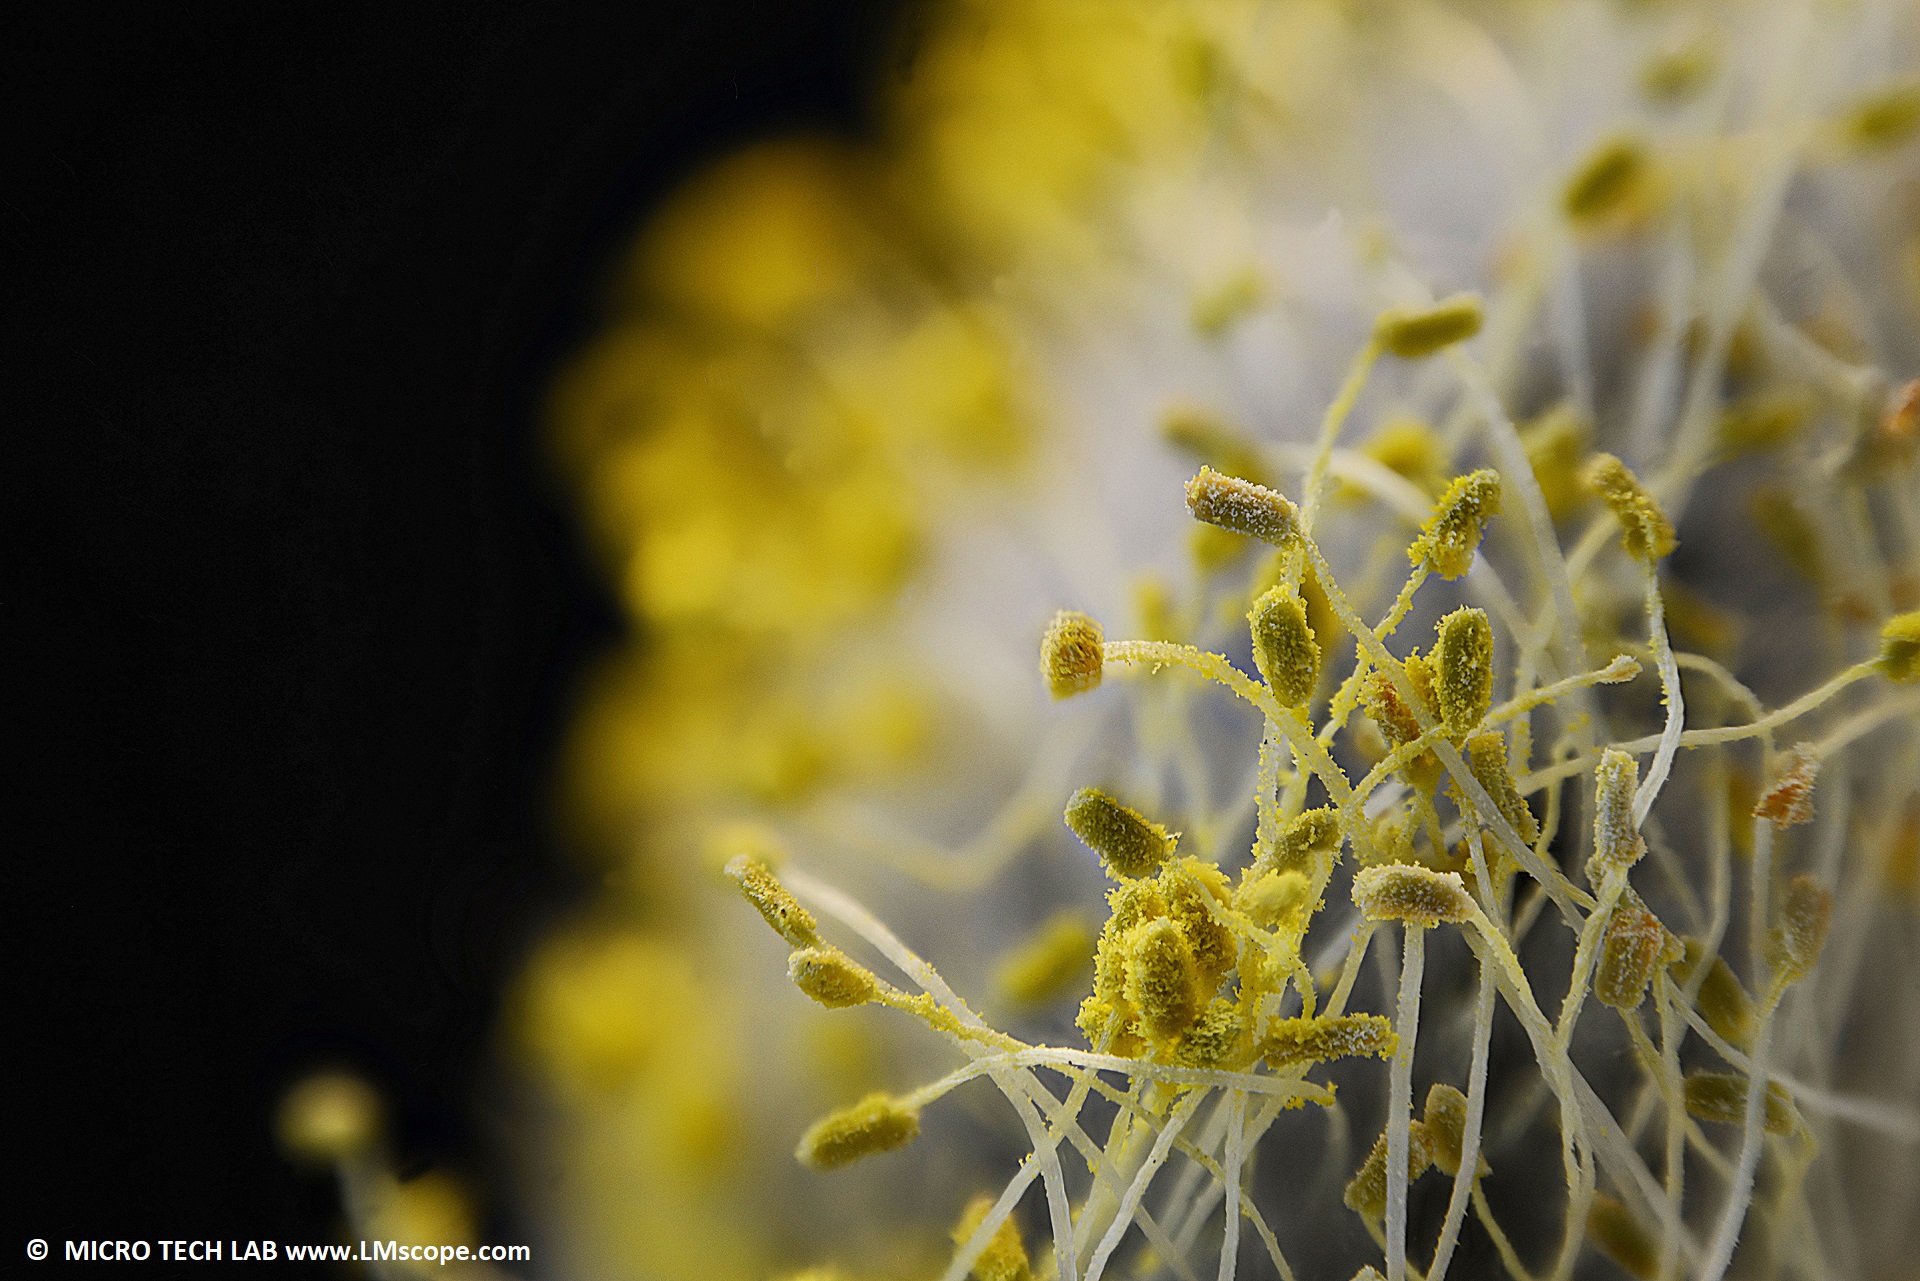 Flowers of the pasture: catkins under the LM macroscope